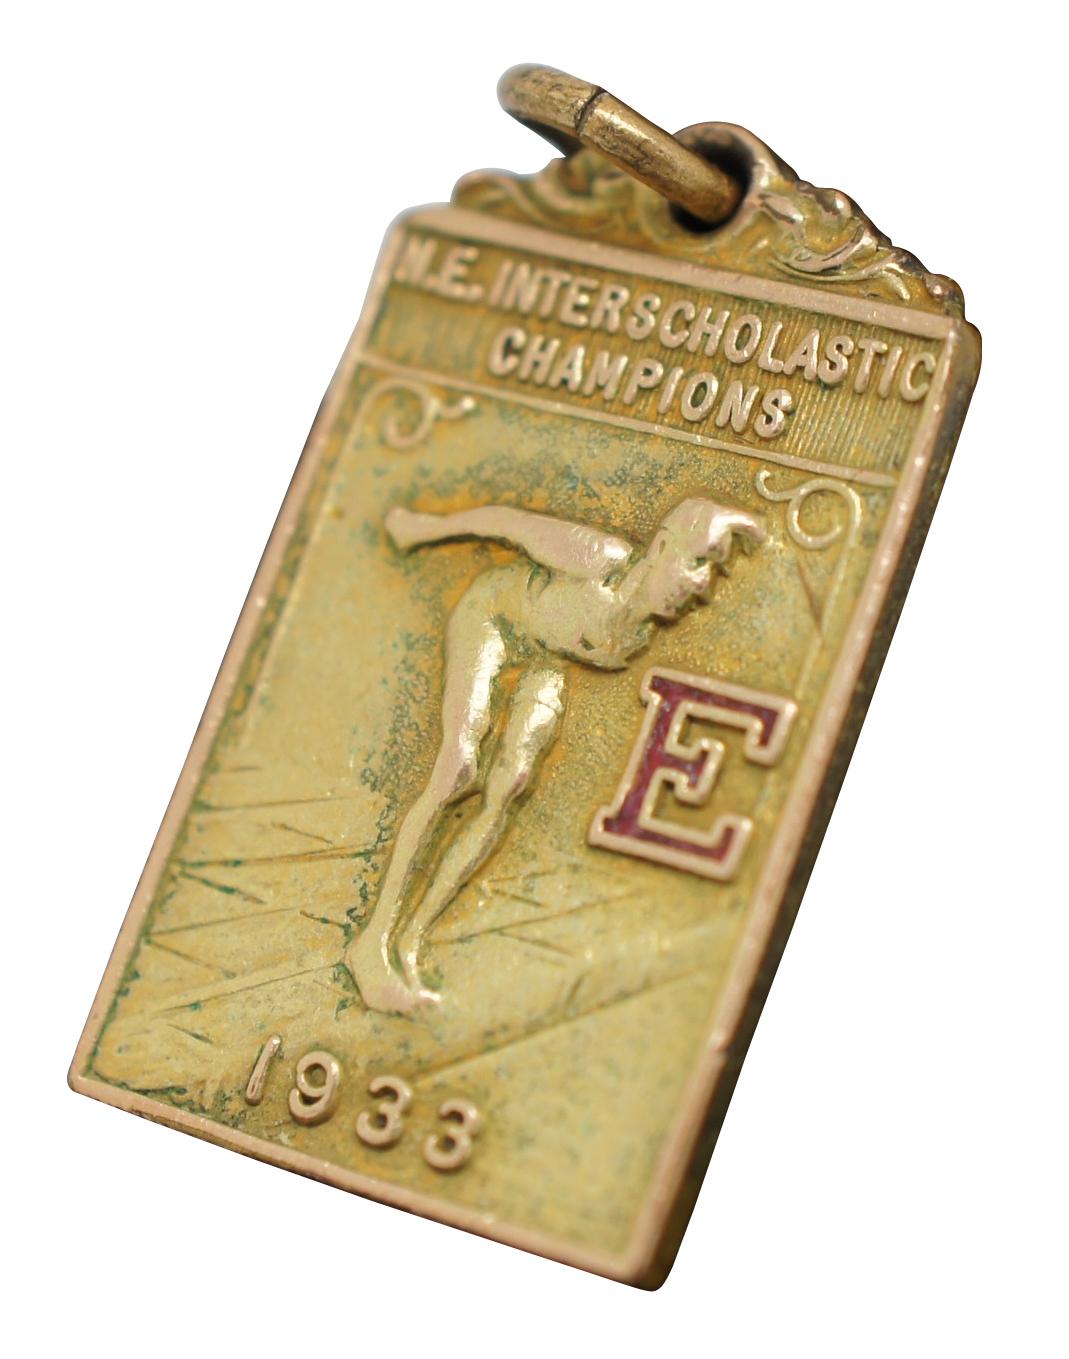 Rare antique 1933 gold filled medal or charm with the words “NE Interscholastic Champions” above a figure prepared to dive into a pool, next to an enameled “E.” Engraved on the back “E-35 A-30 W.S.C.”
